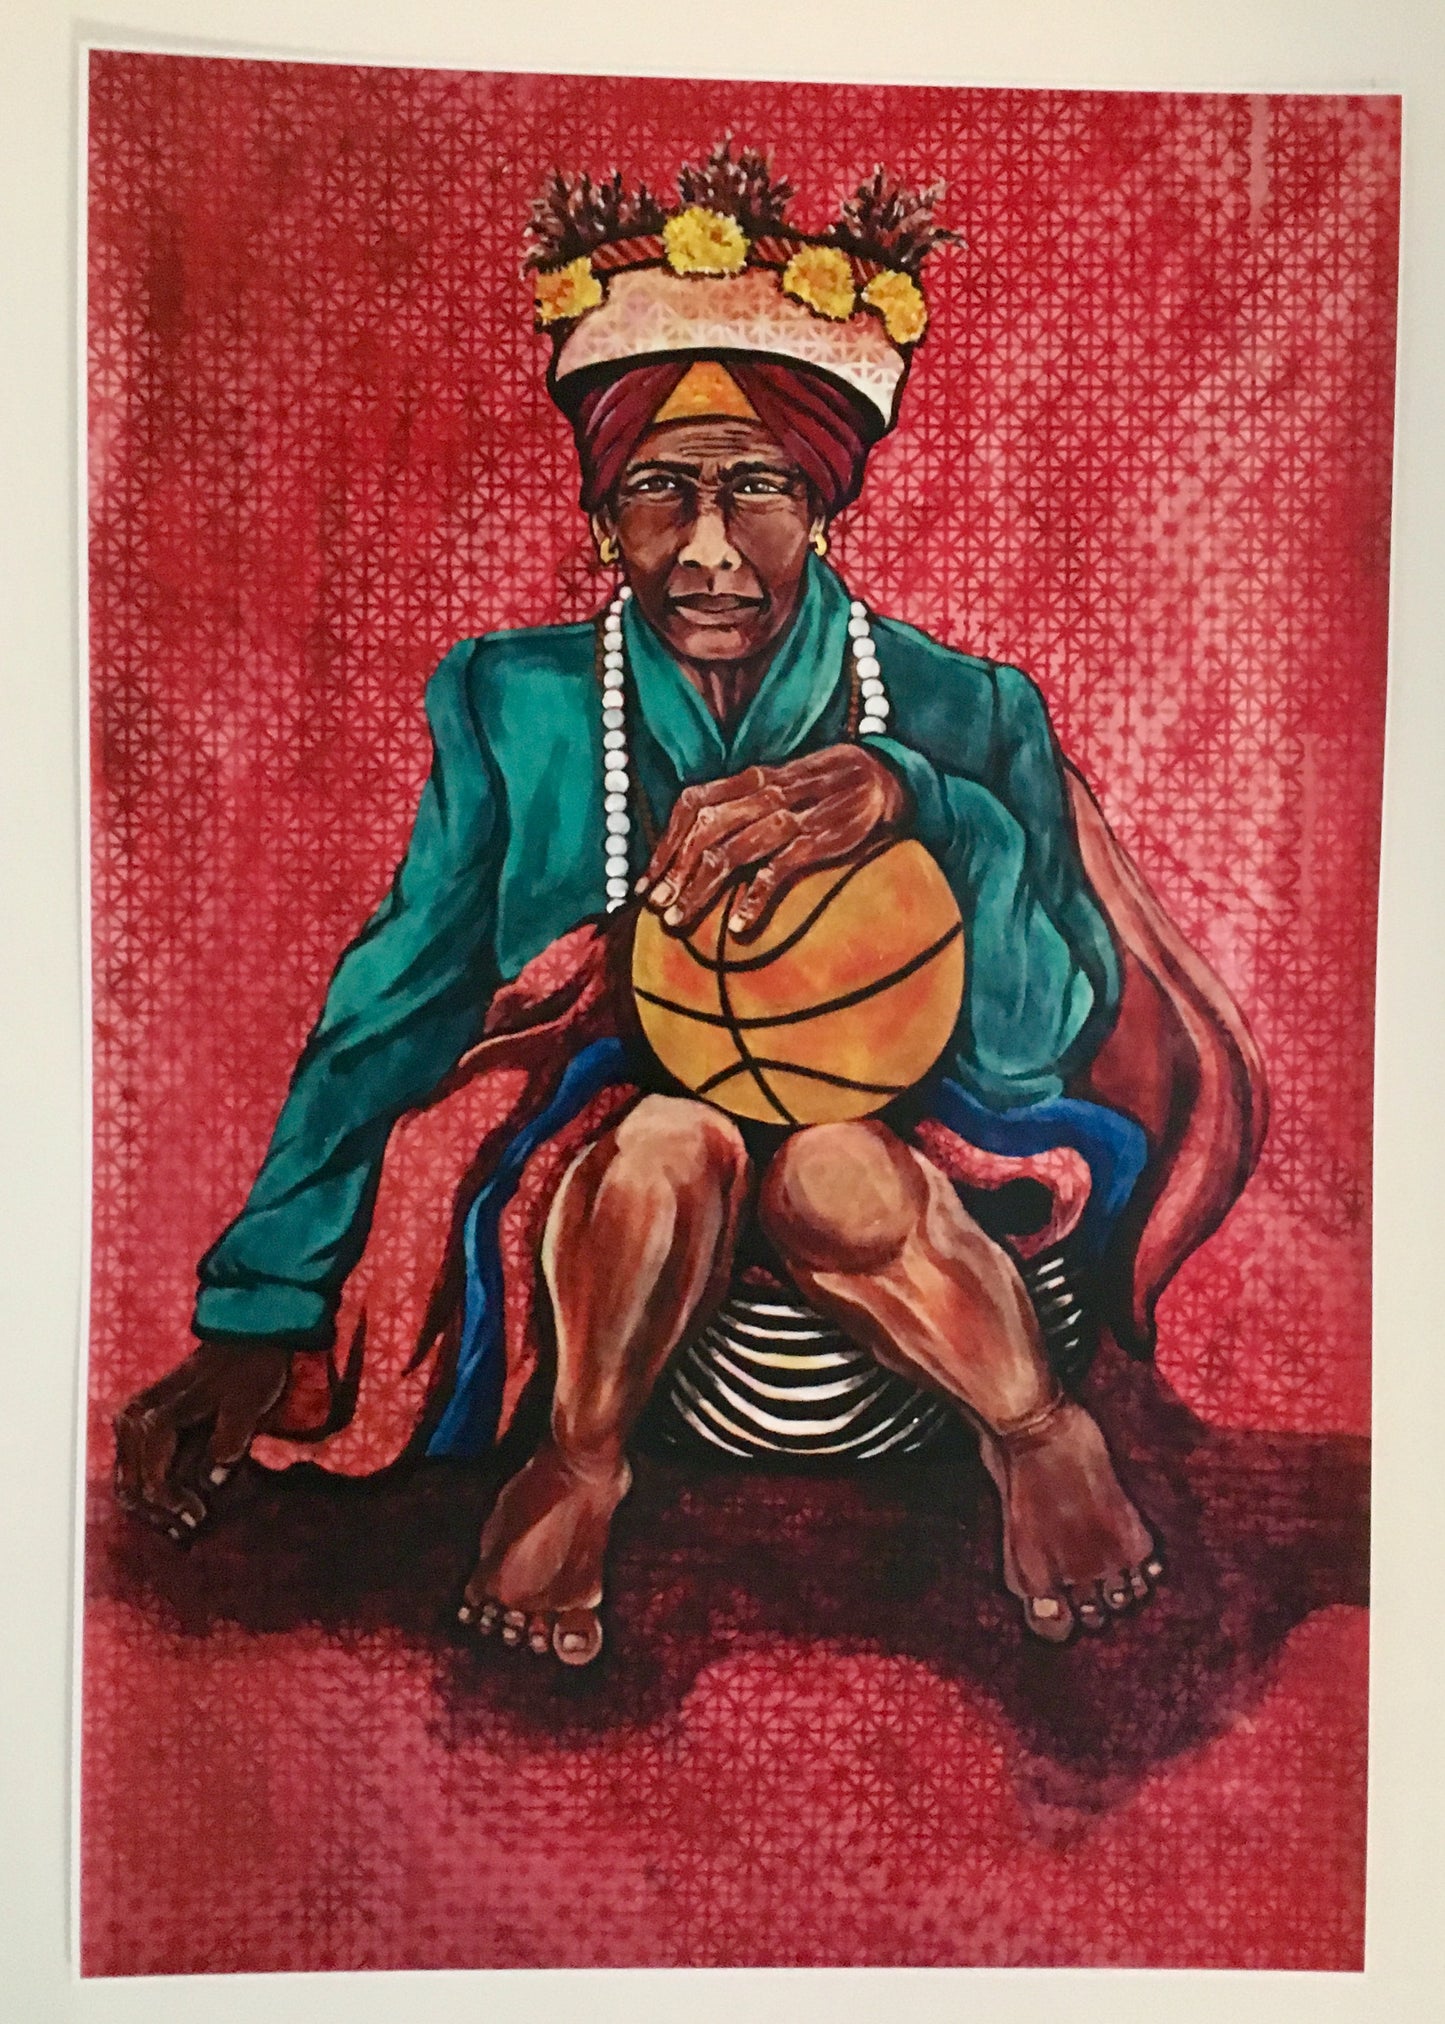 Woman with Basketball (Untitled) Fine Art Print by Cece Carpio